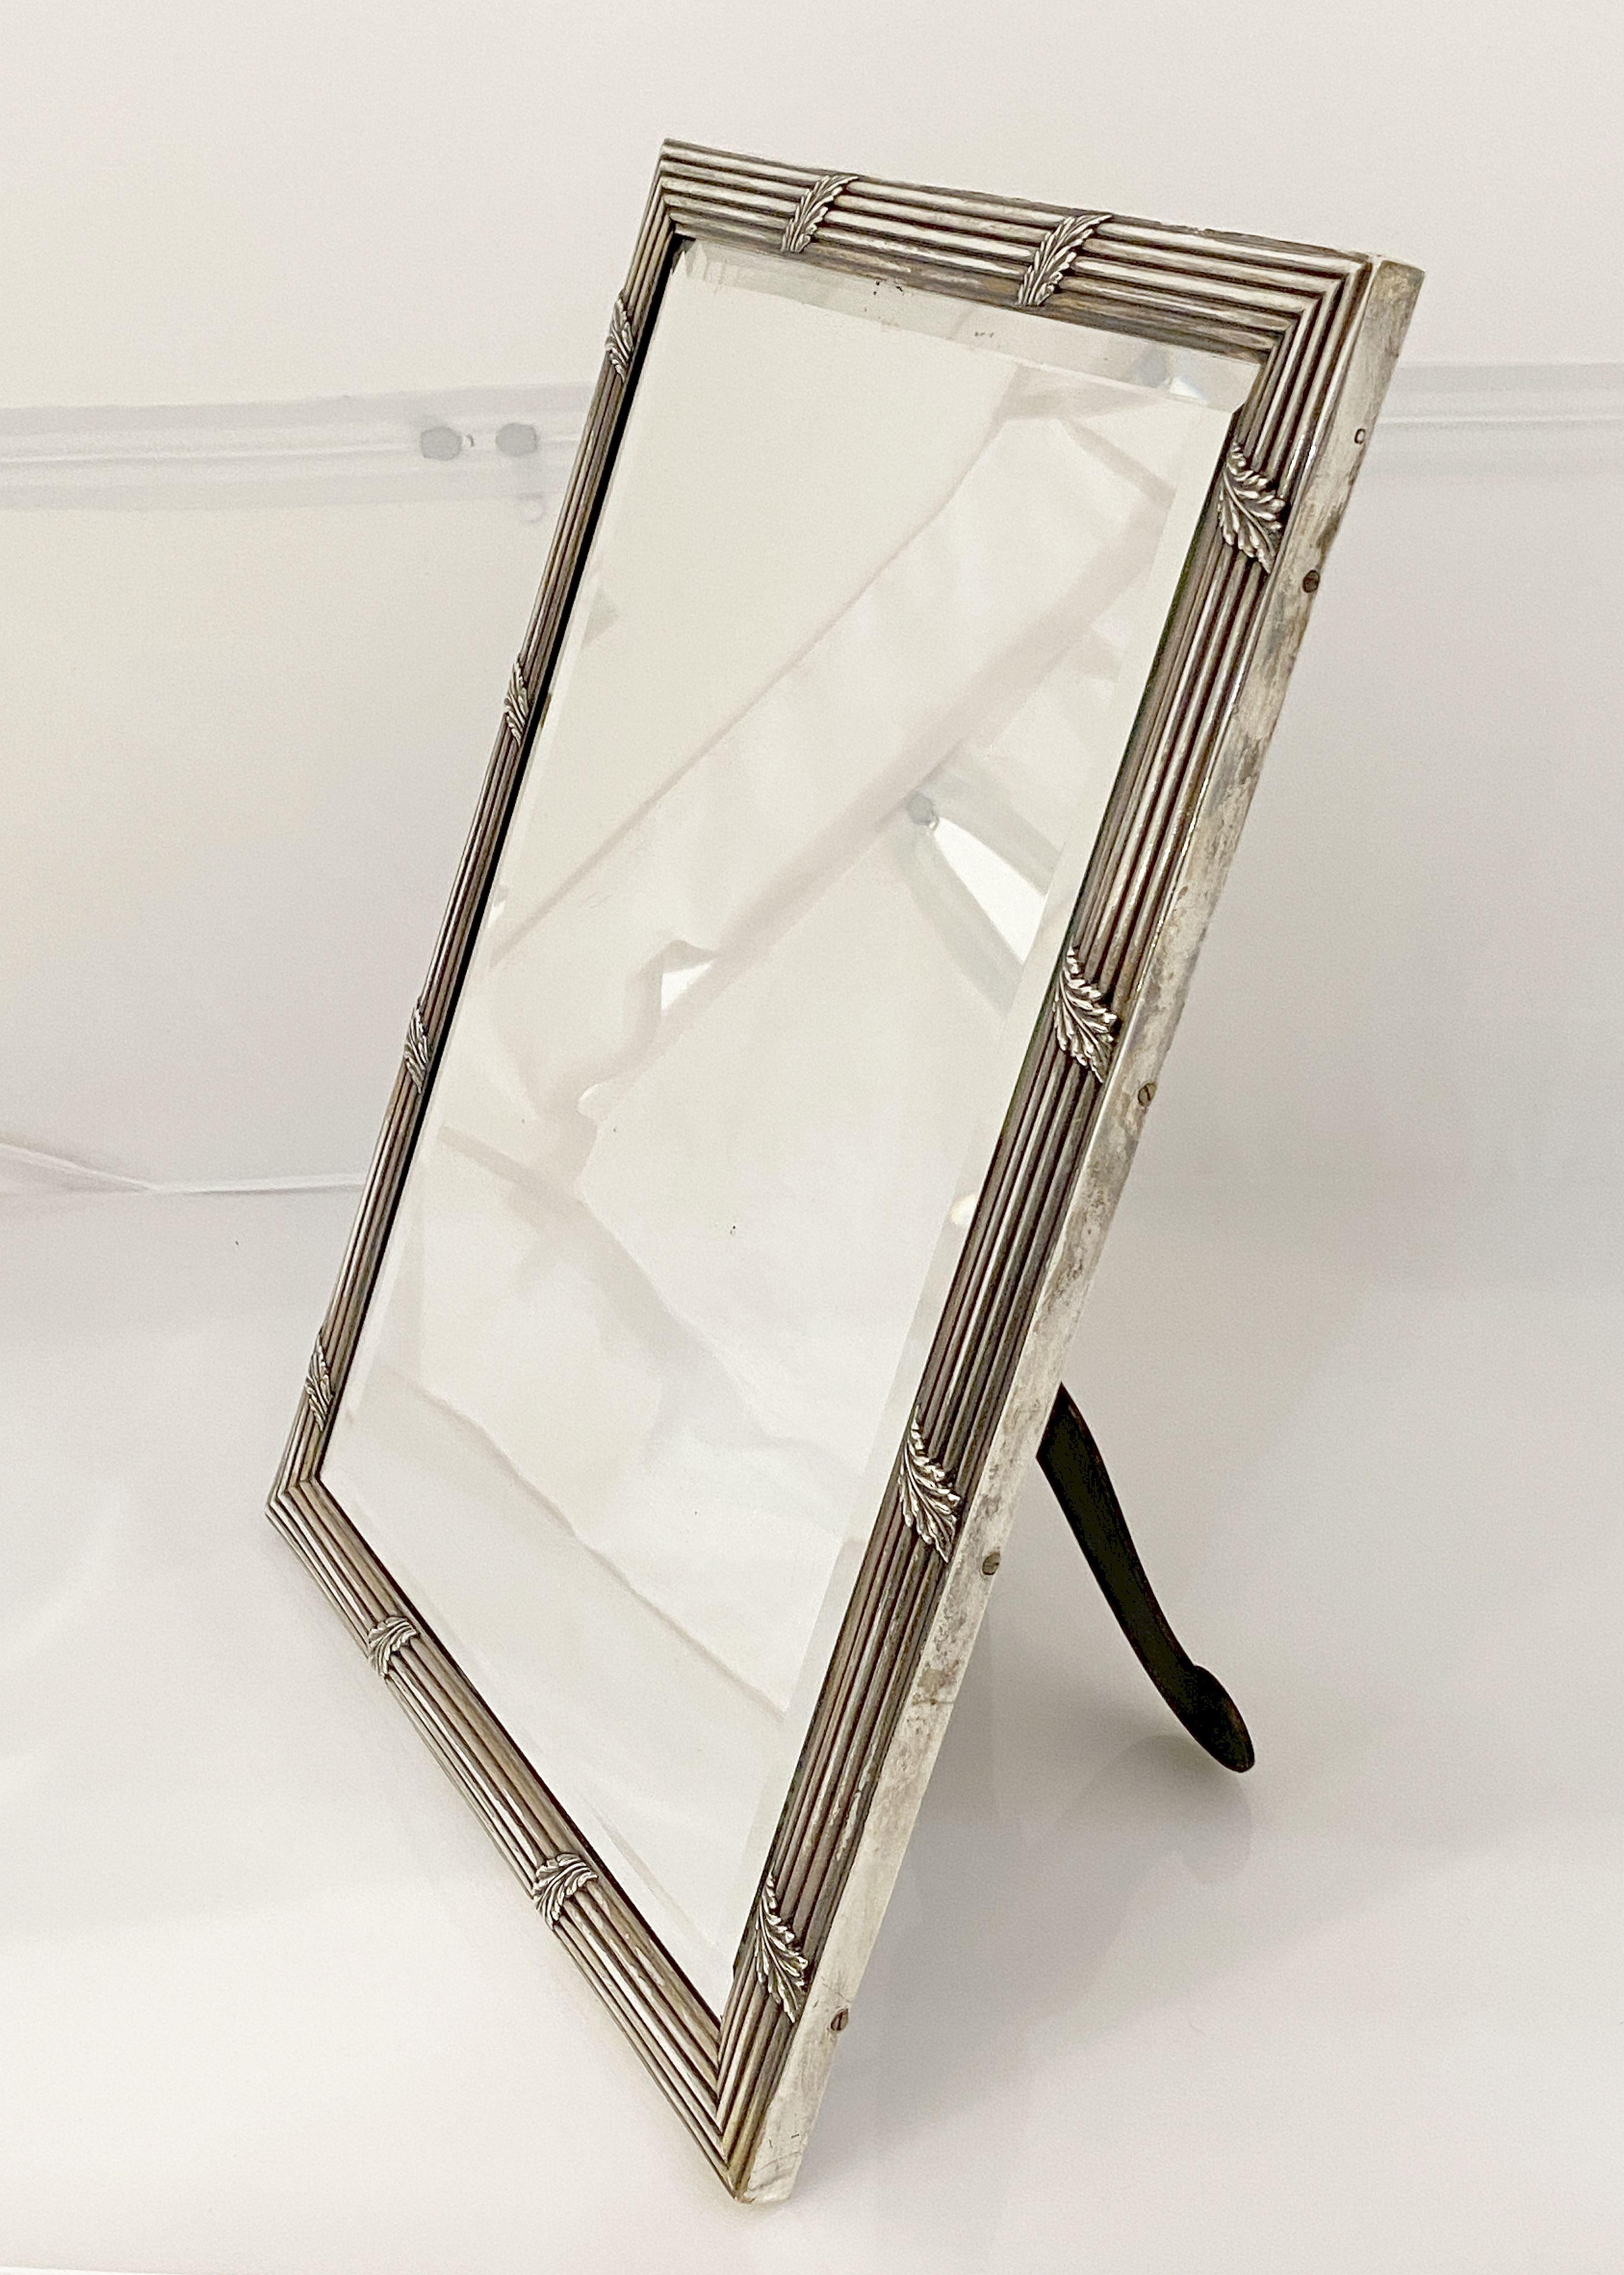 An elegant French vanity or tabletop mirror of fine silver, featuring a Neo-Classical relief design to the frame, enclosing a rectangular beveled mirror, back of wood with folding brass support stand.

Can be mounted on a wall or used as a vanity